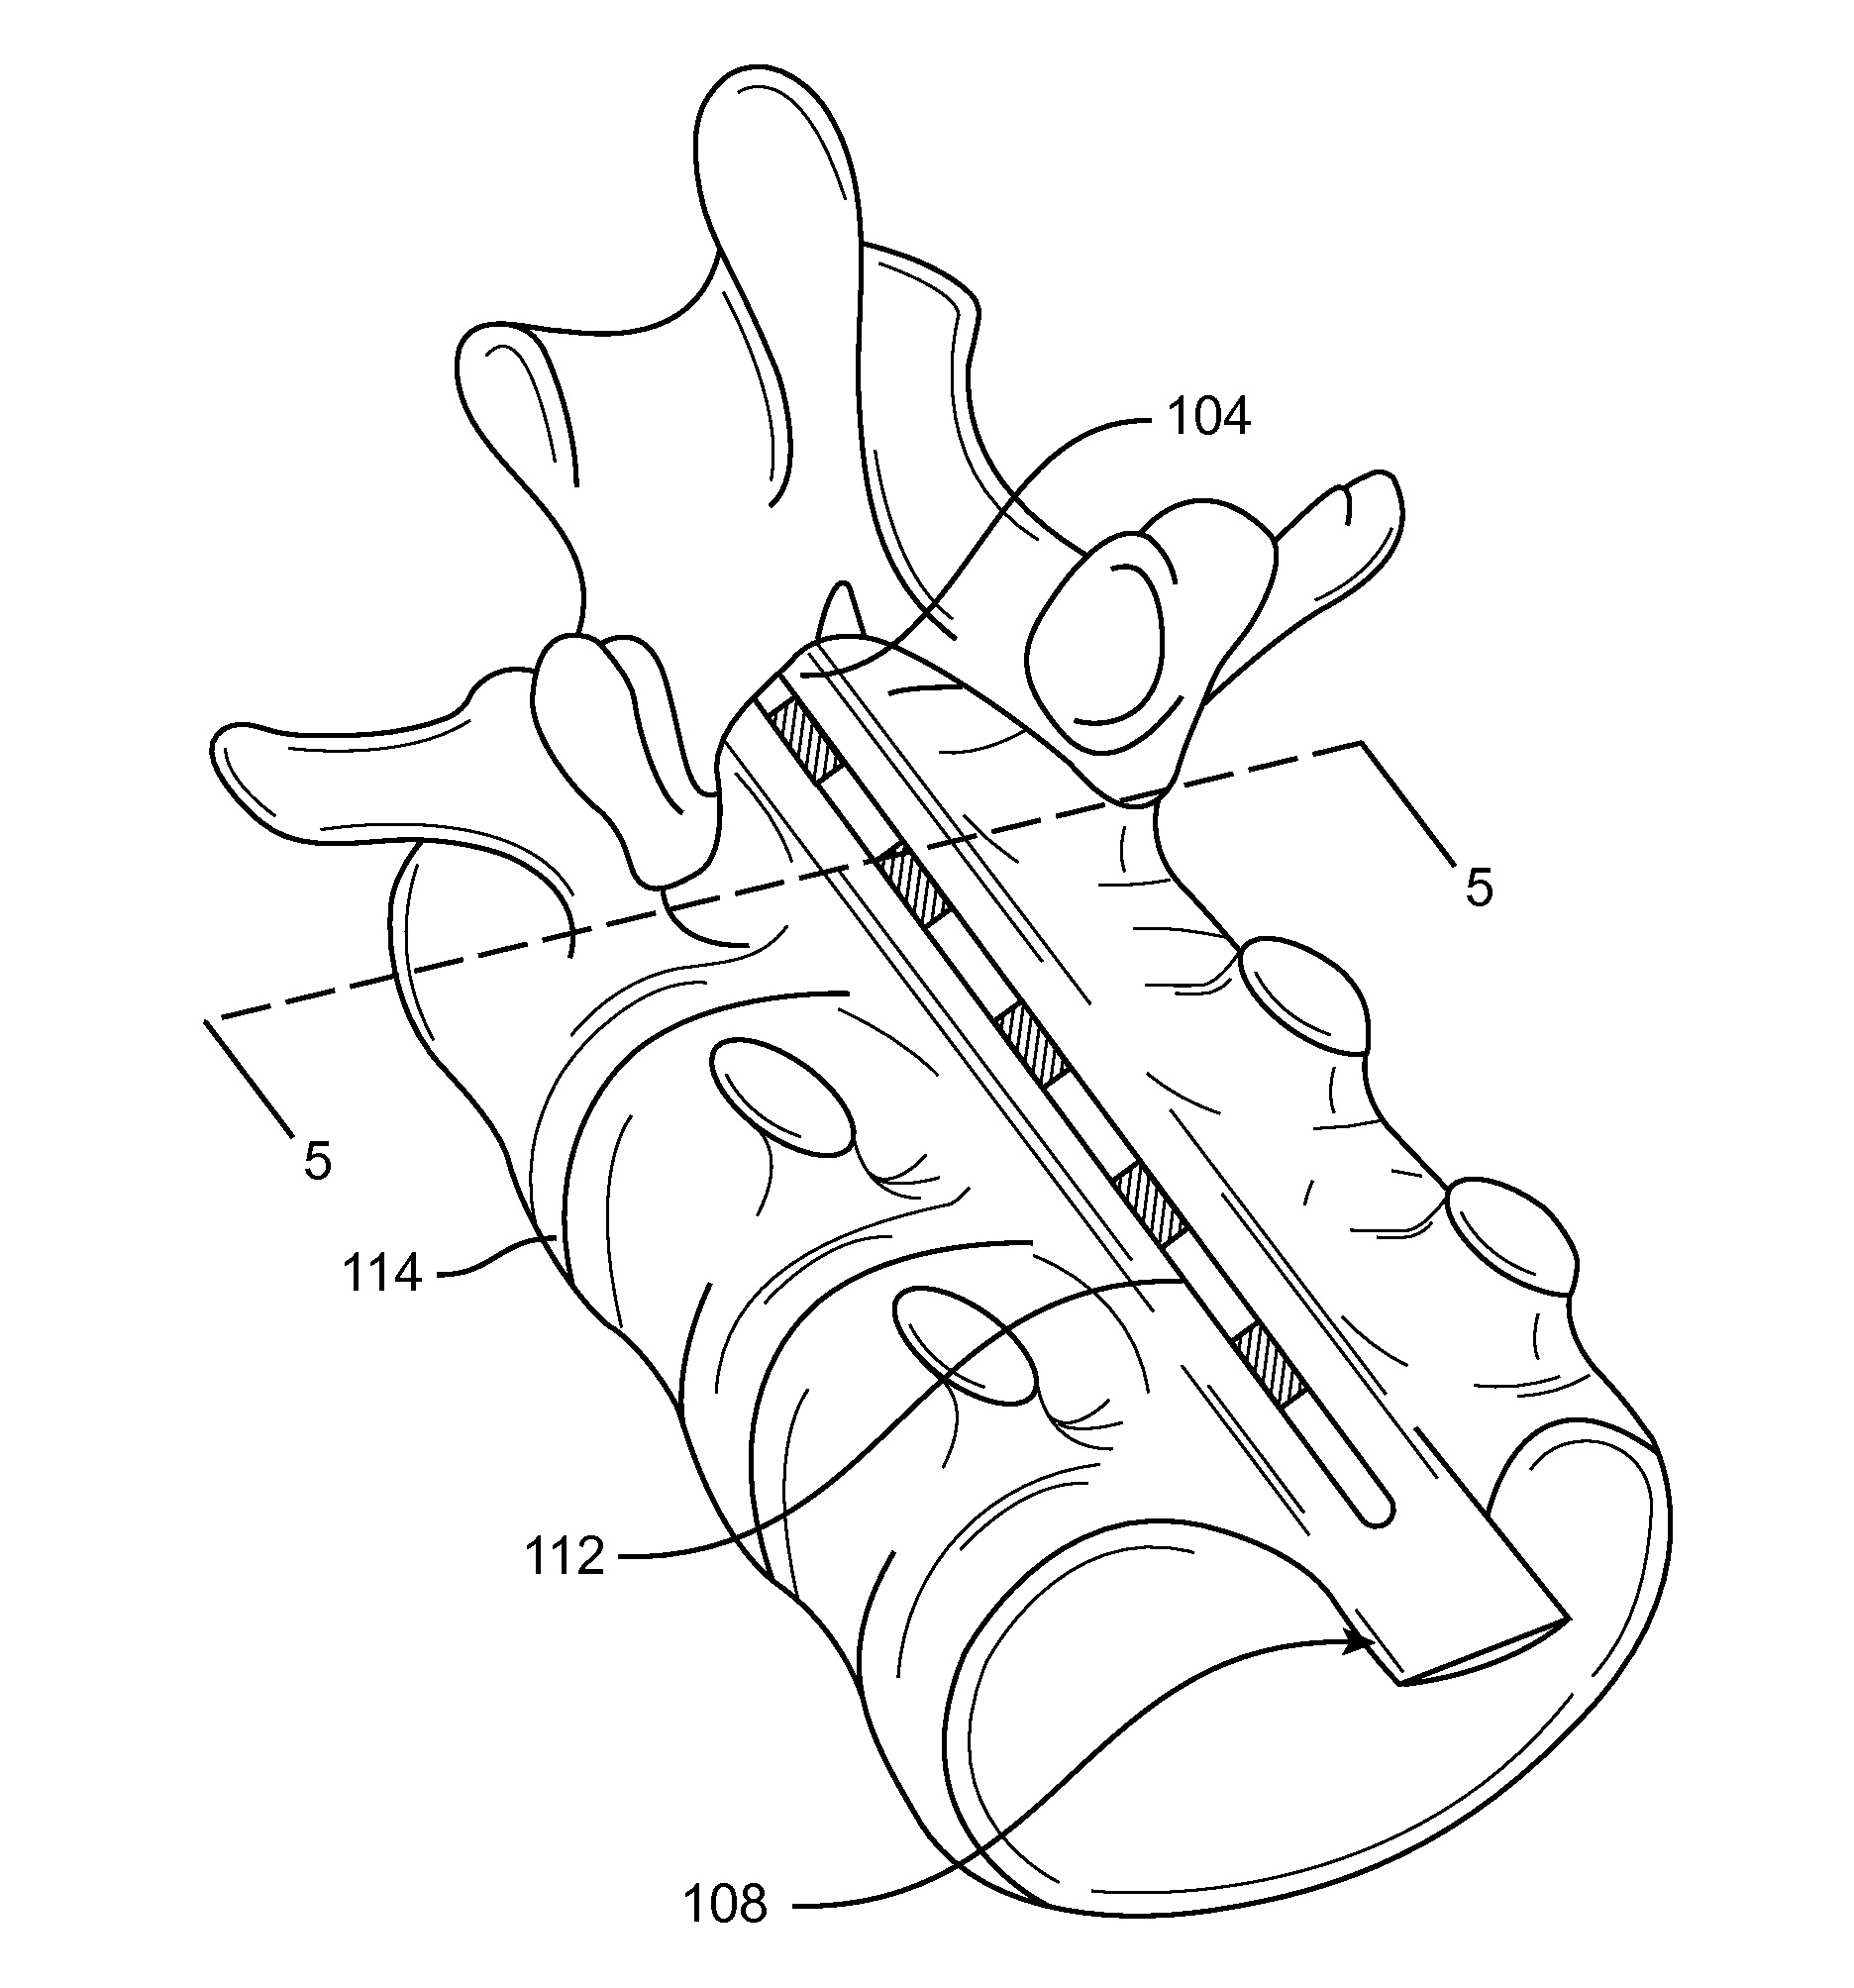 System and method for electrical modulation of the posterior longitudinal ligament